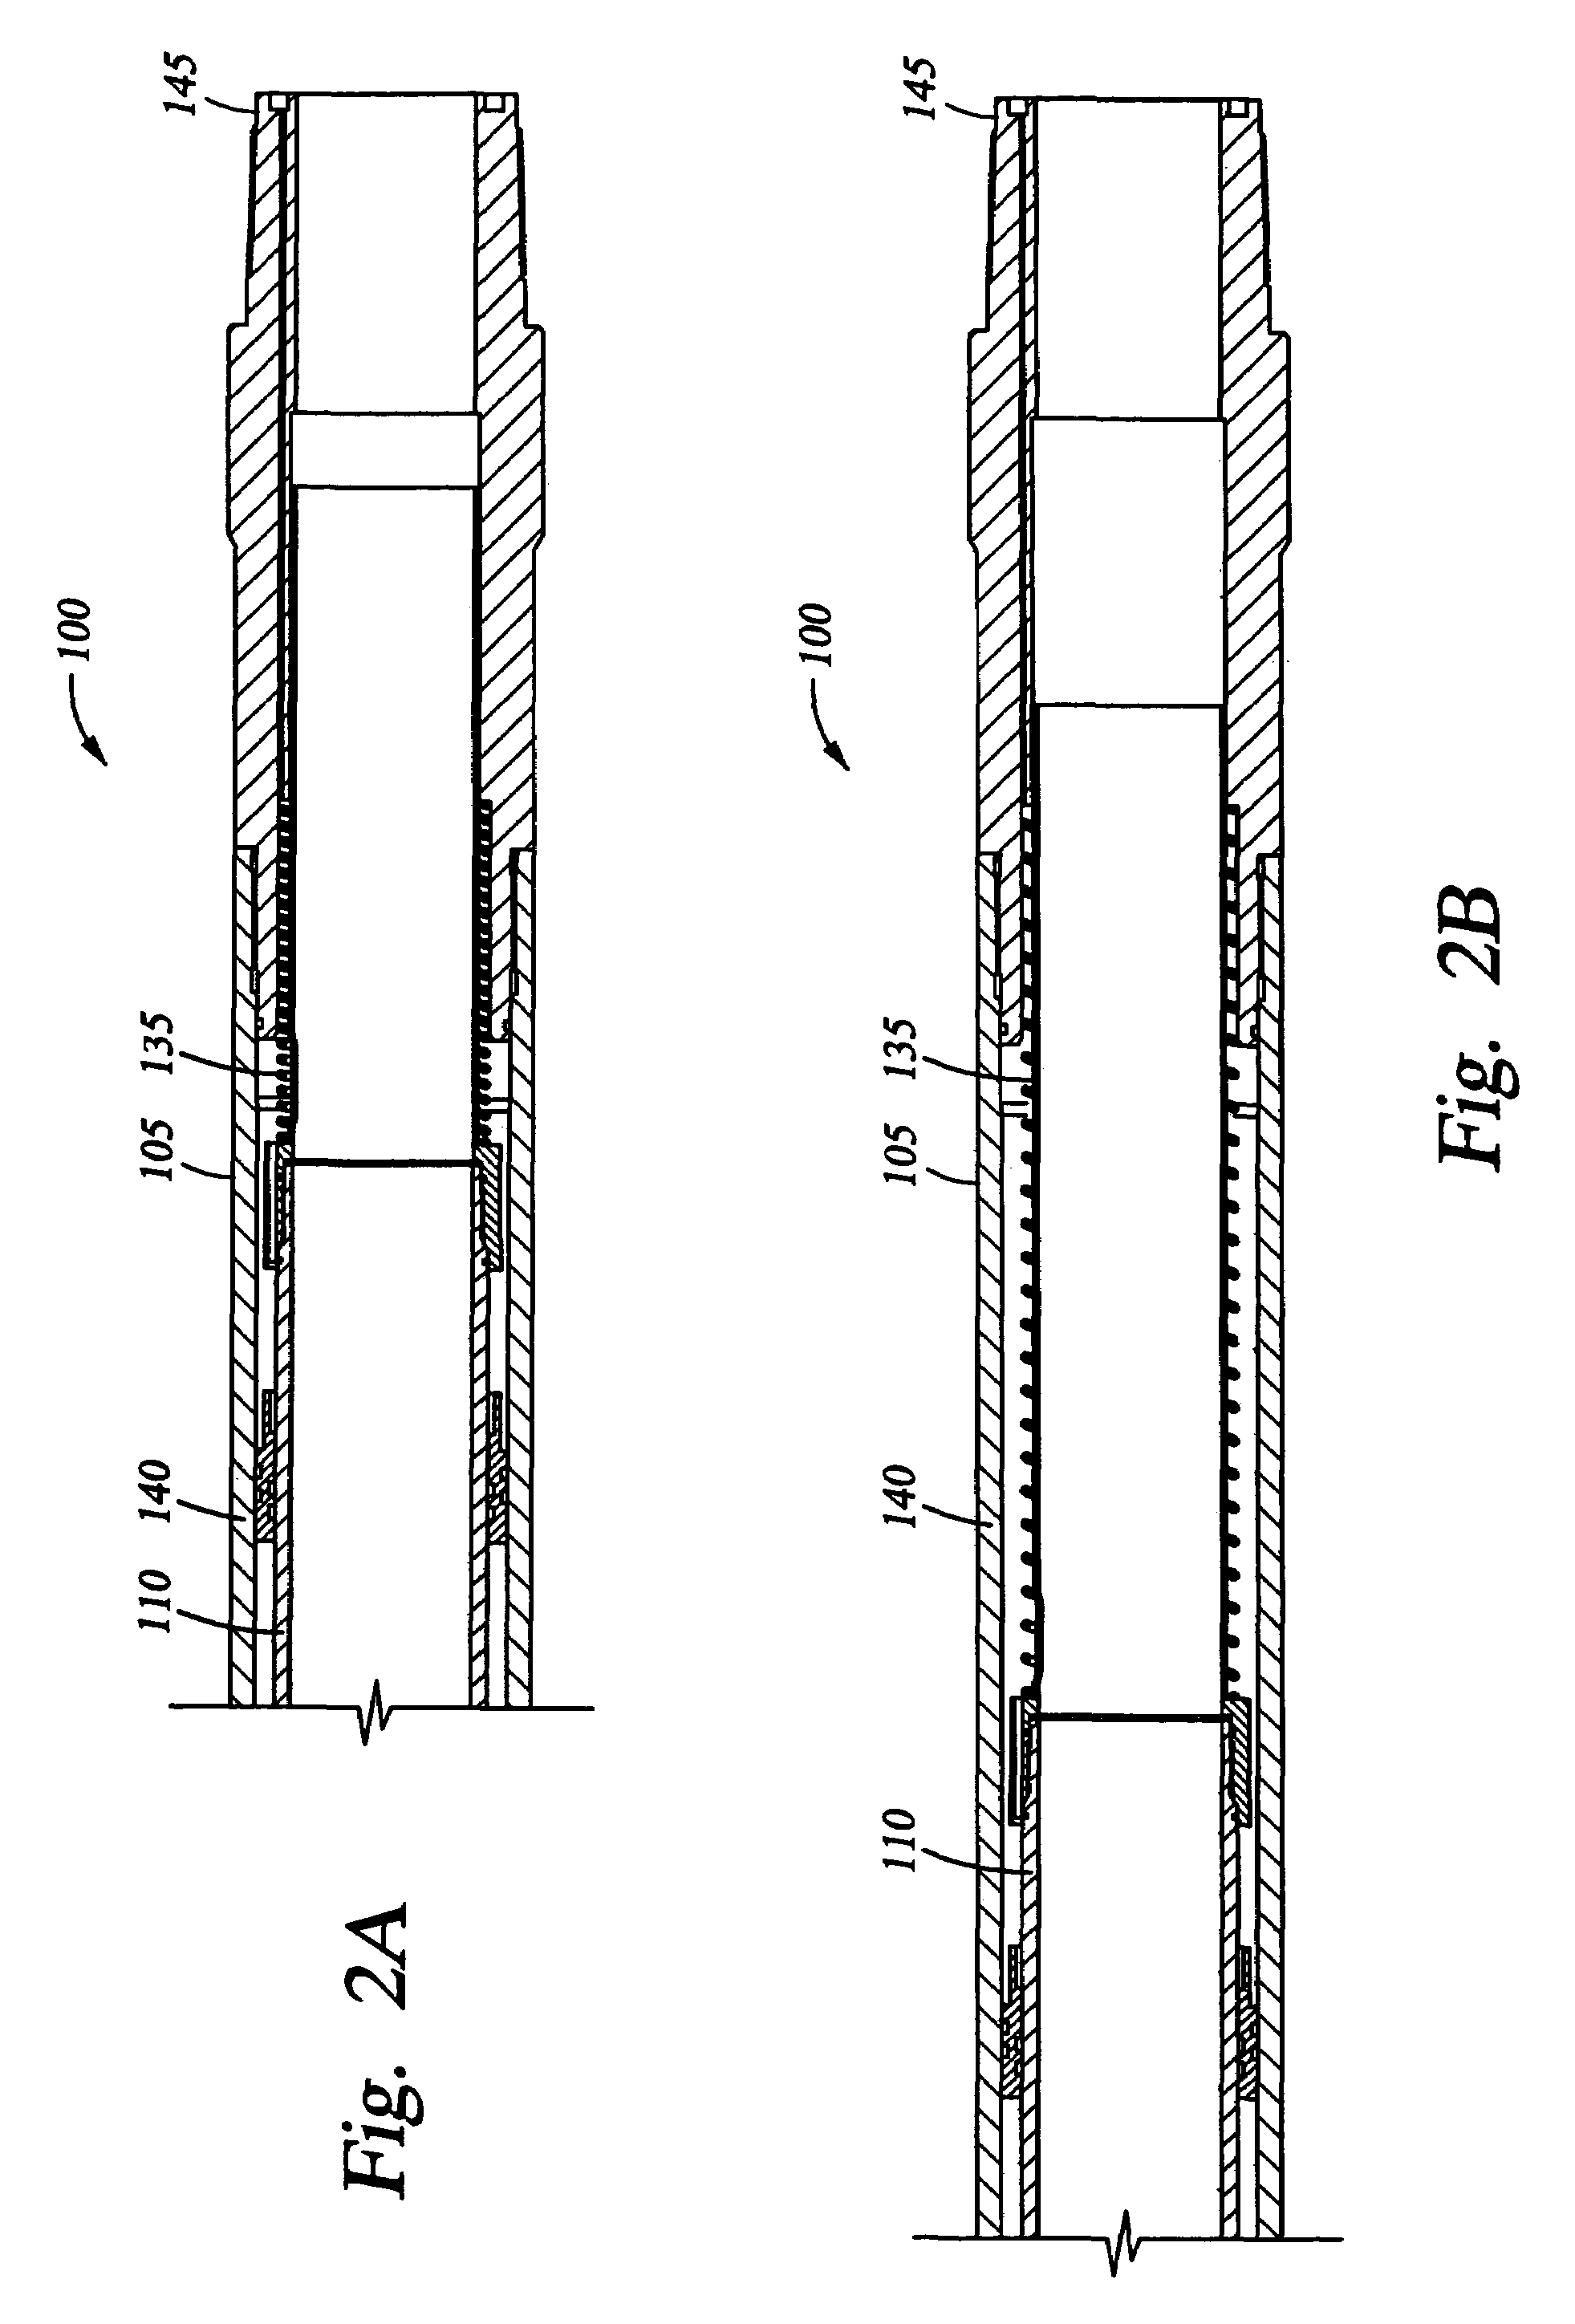 Methods and apparatus to control downhole tools